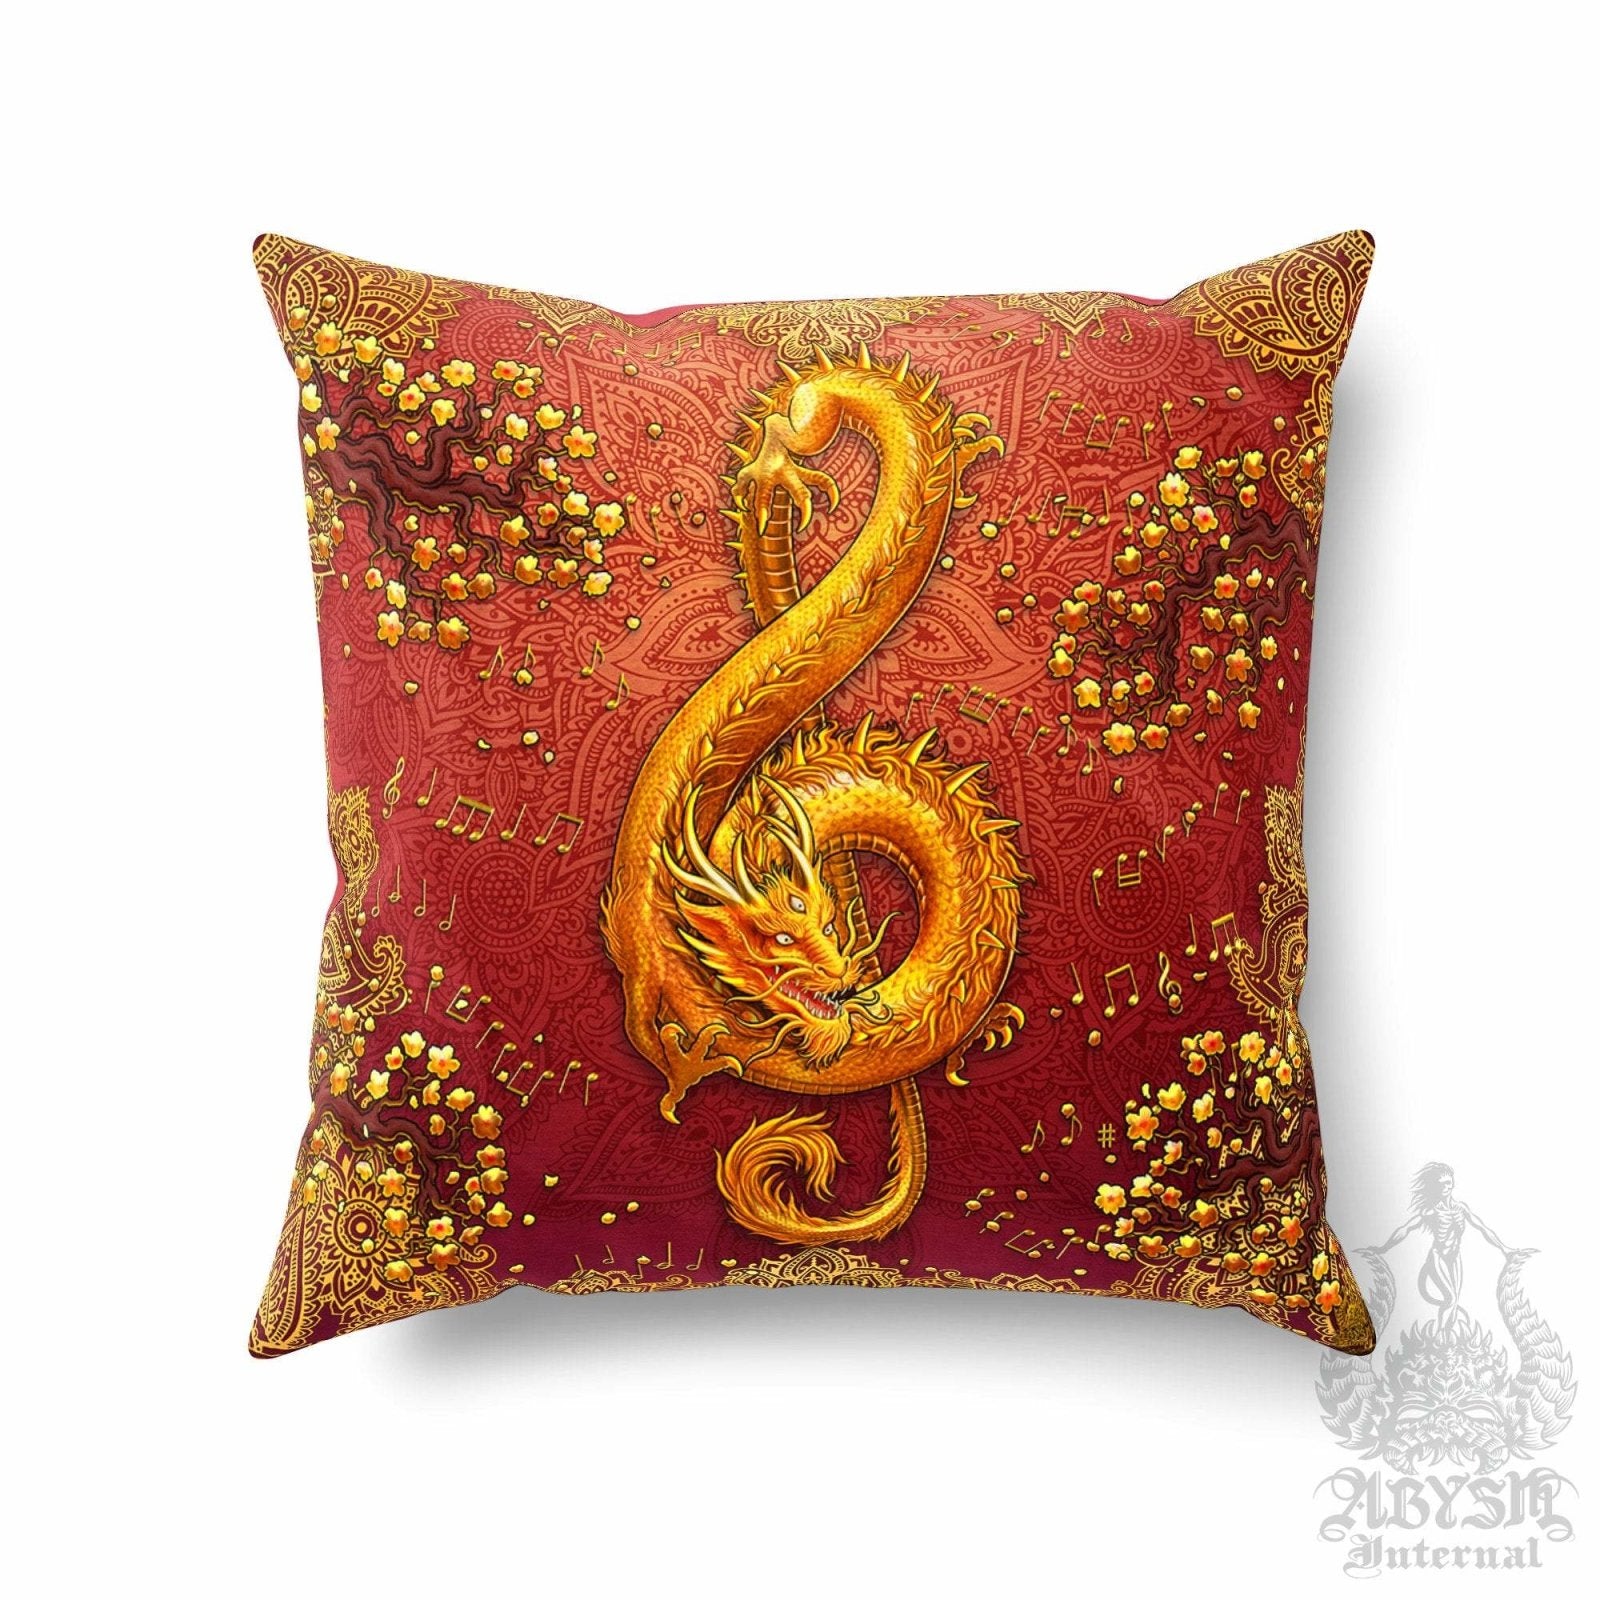 Boho Throw Pillow, Decorative Accent Cushion, Hippie and Indie Home, Music Room Decor, Funky and Eclectic - Treble Clef, Gold Dragon, Mandalas - Abysm Internal